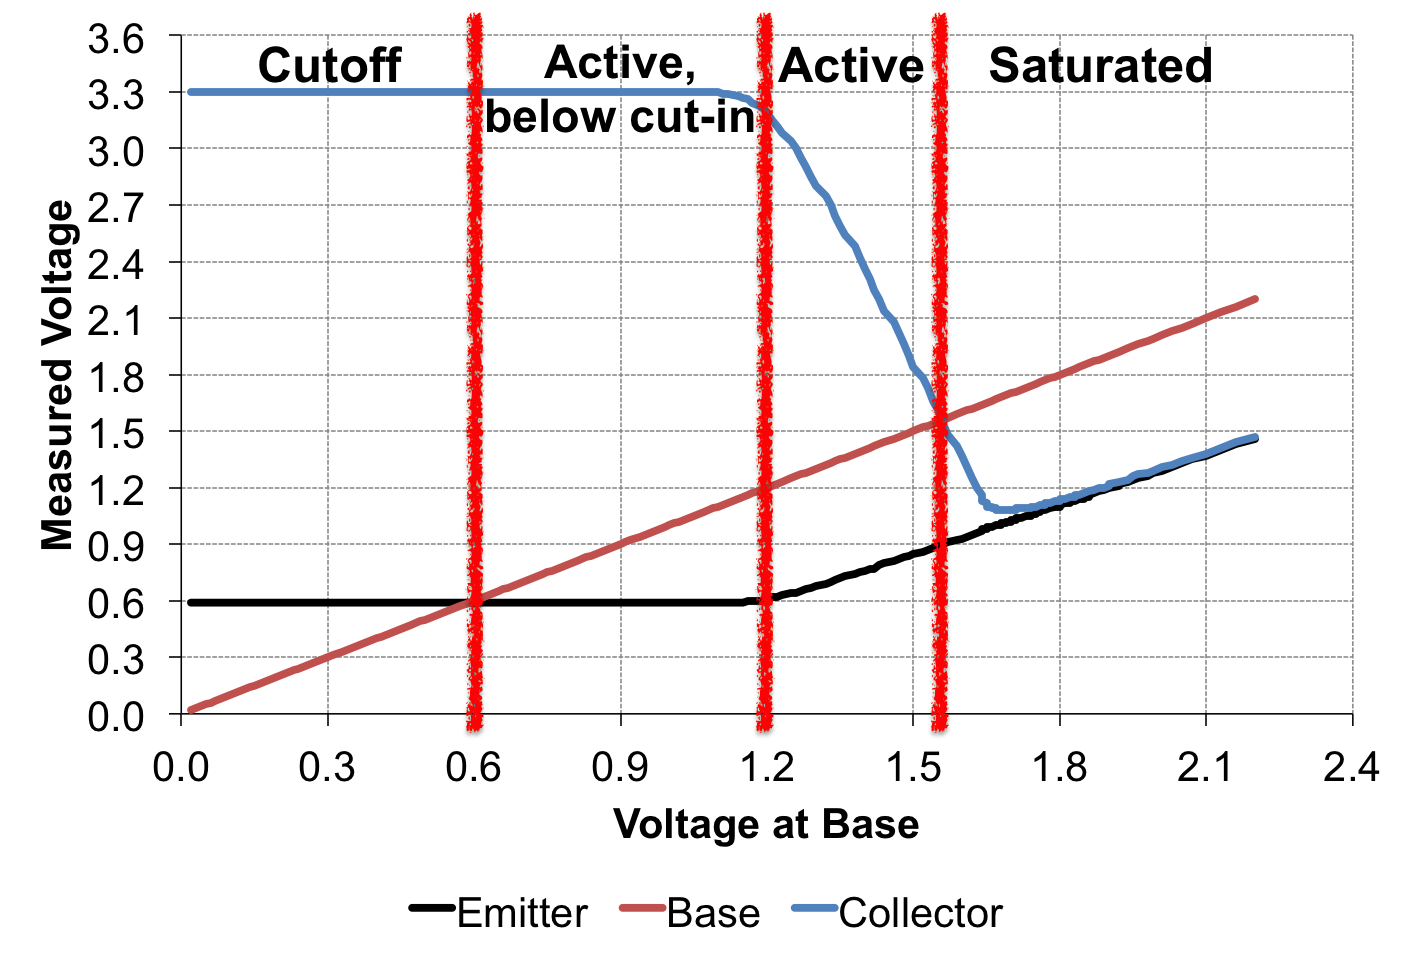 Voltage at the collector, base, and emitter as base is changed, measured using digital means